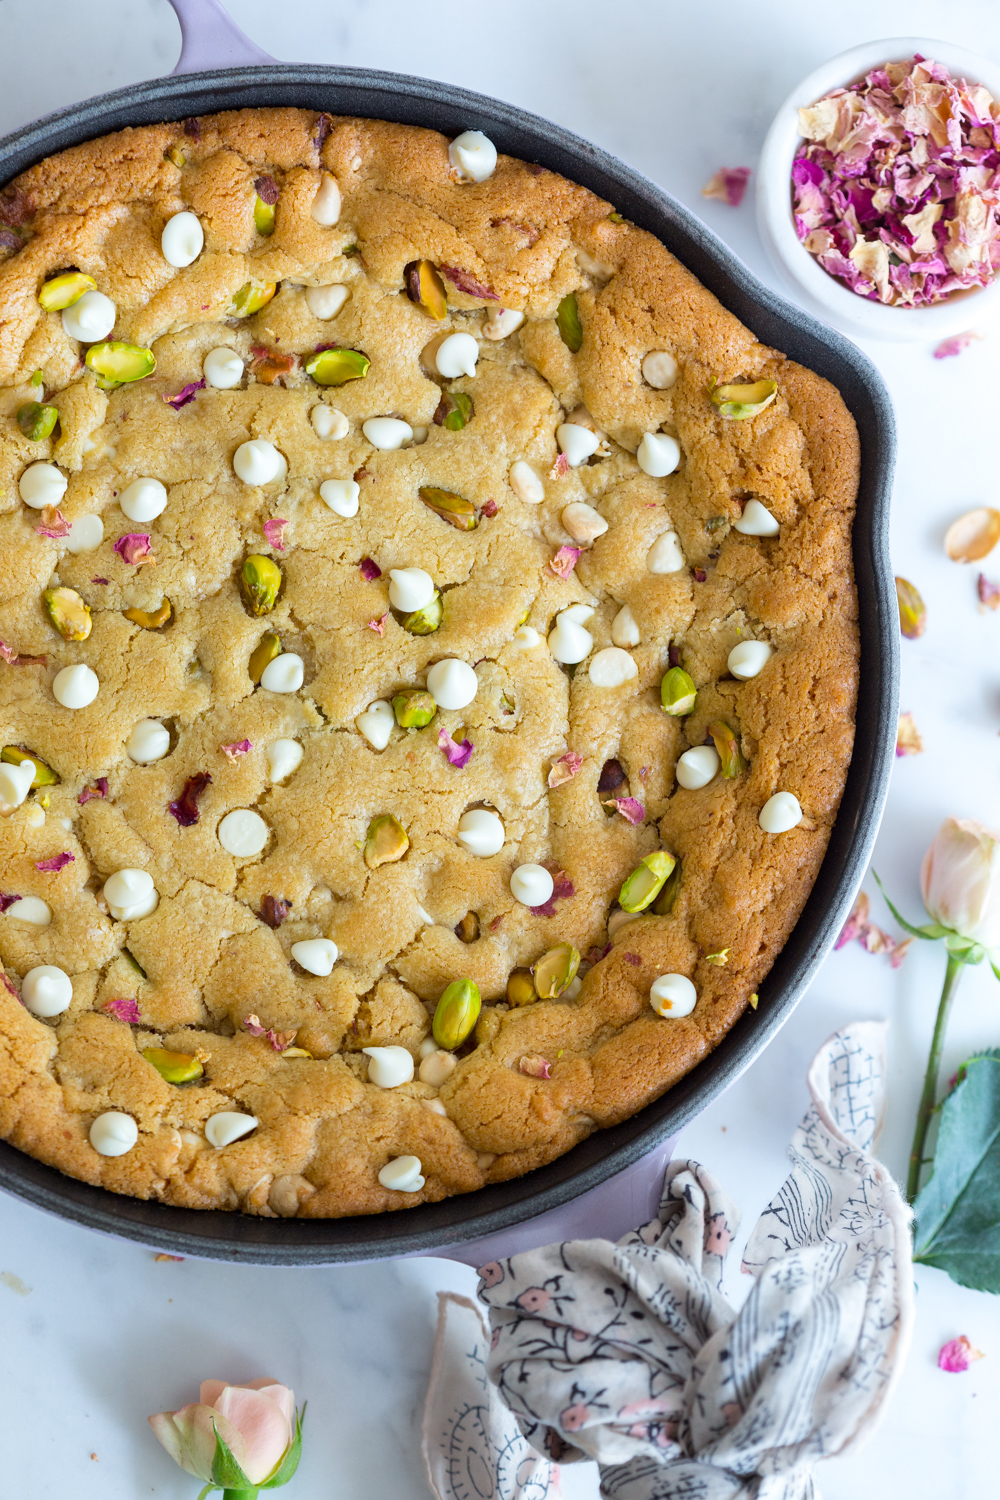 Tahini Skillet Cookie with white chocolate, pistachios and rose petals